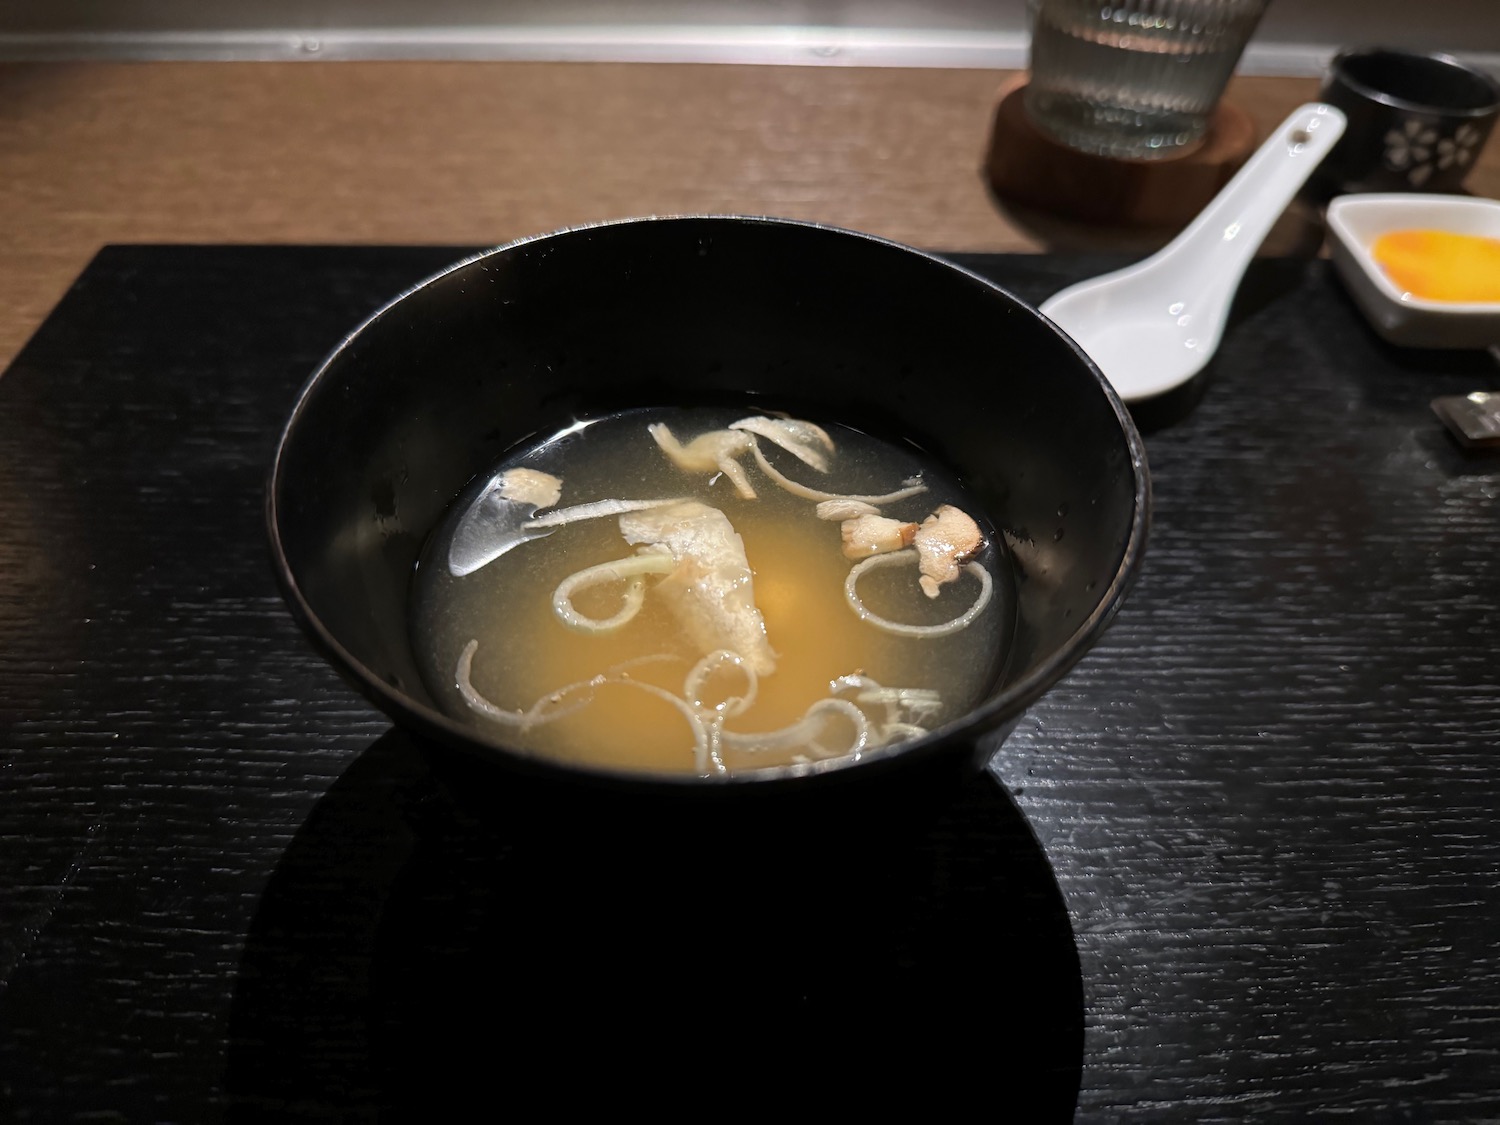 a bowl of soup with noodles